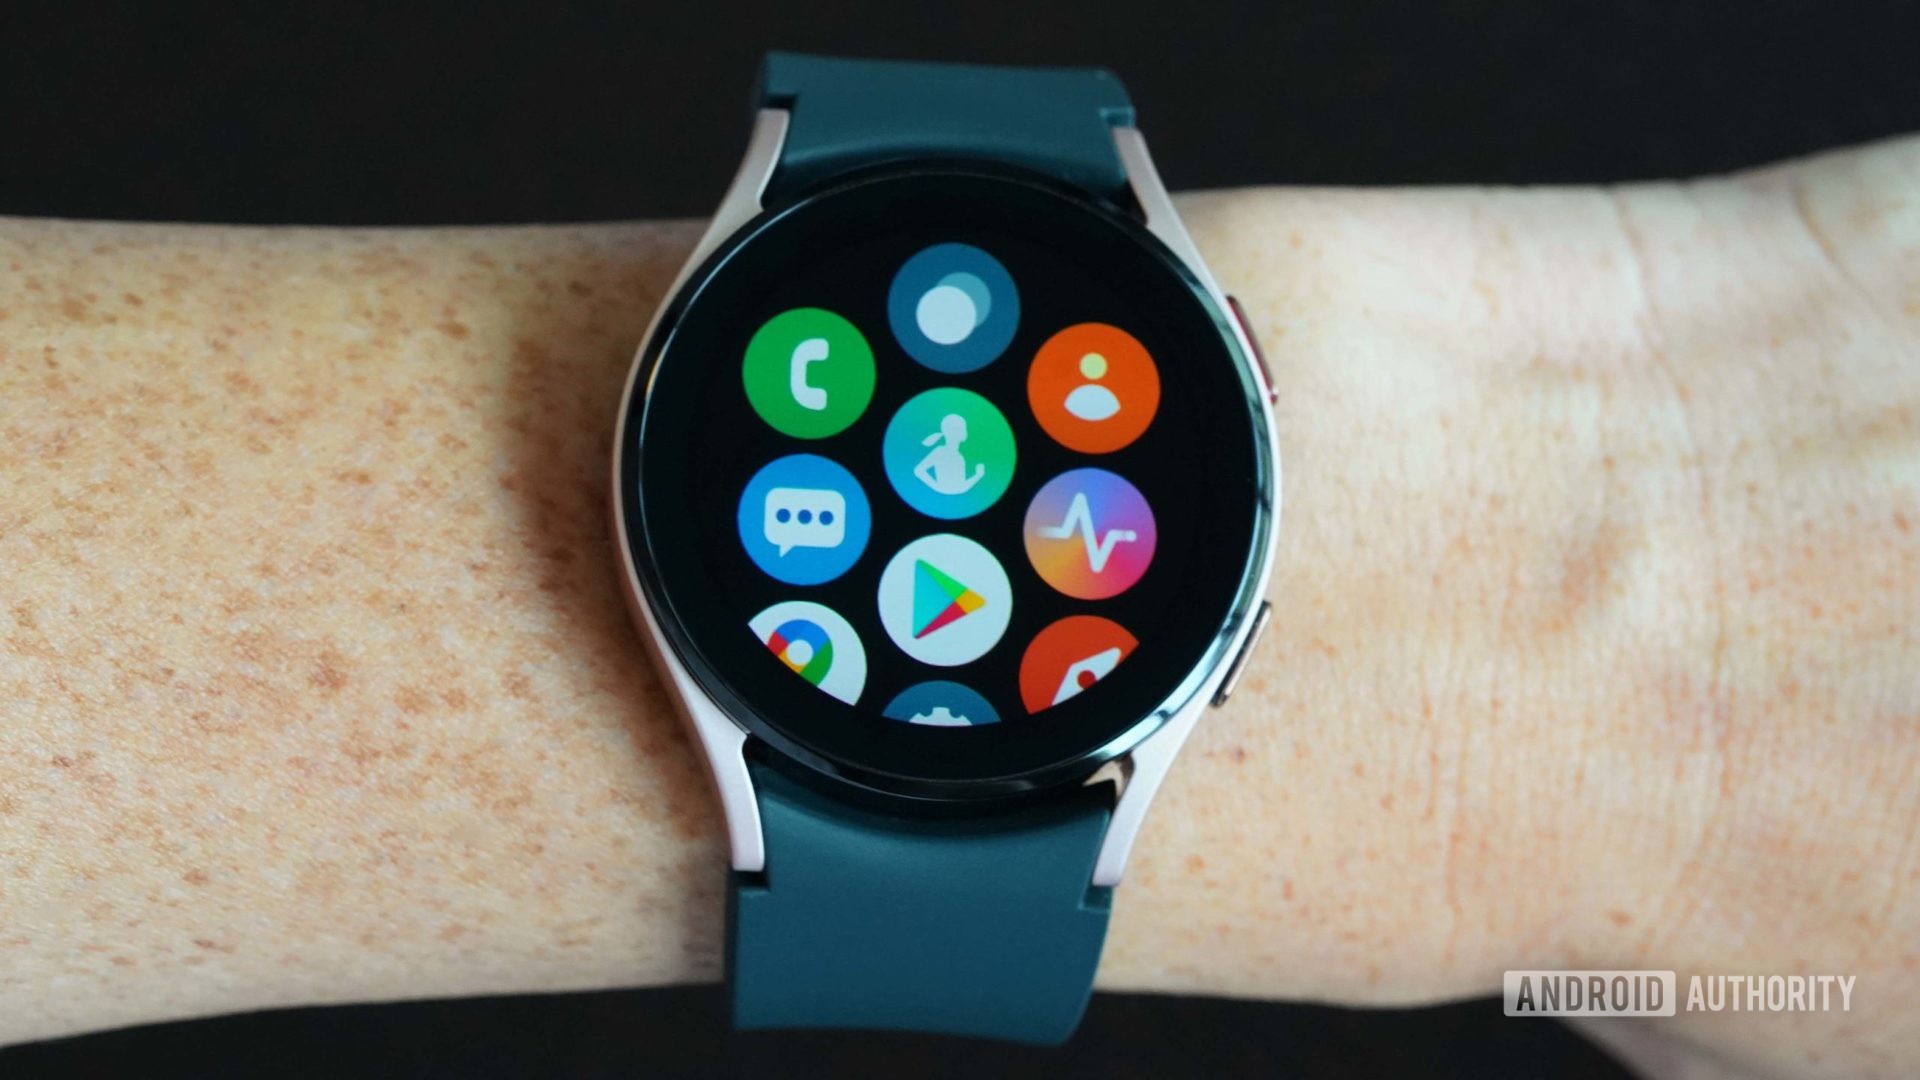 Samsung Galaxy Watch 4 displays the app screen on a black background.